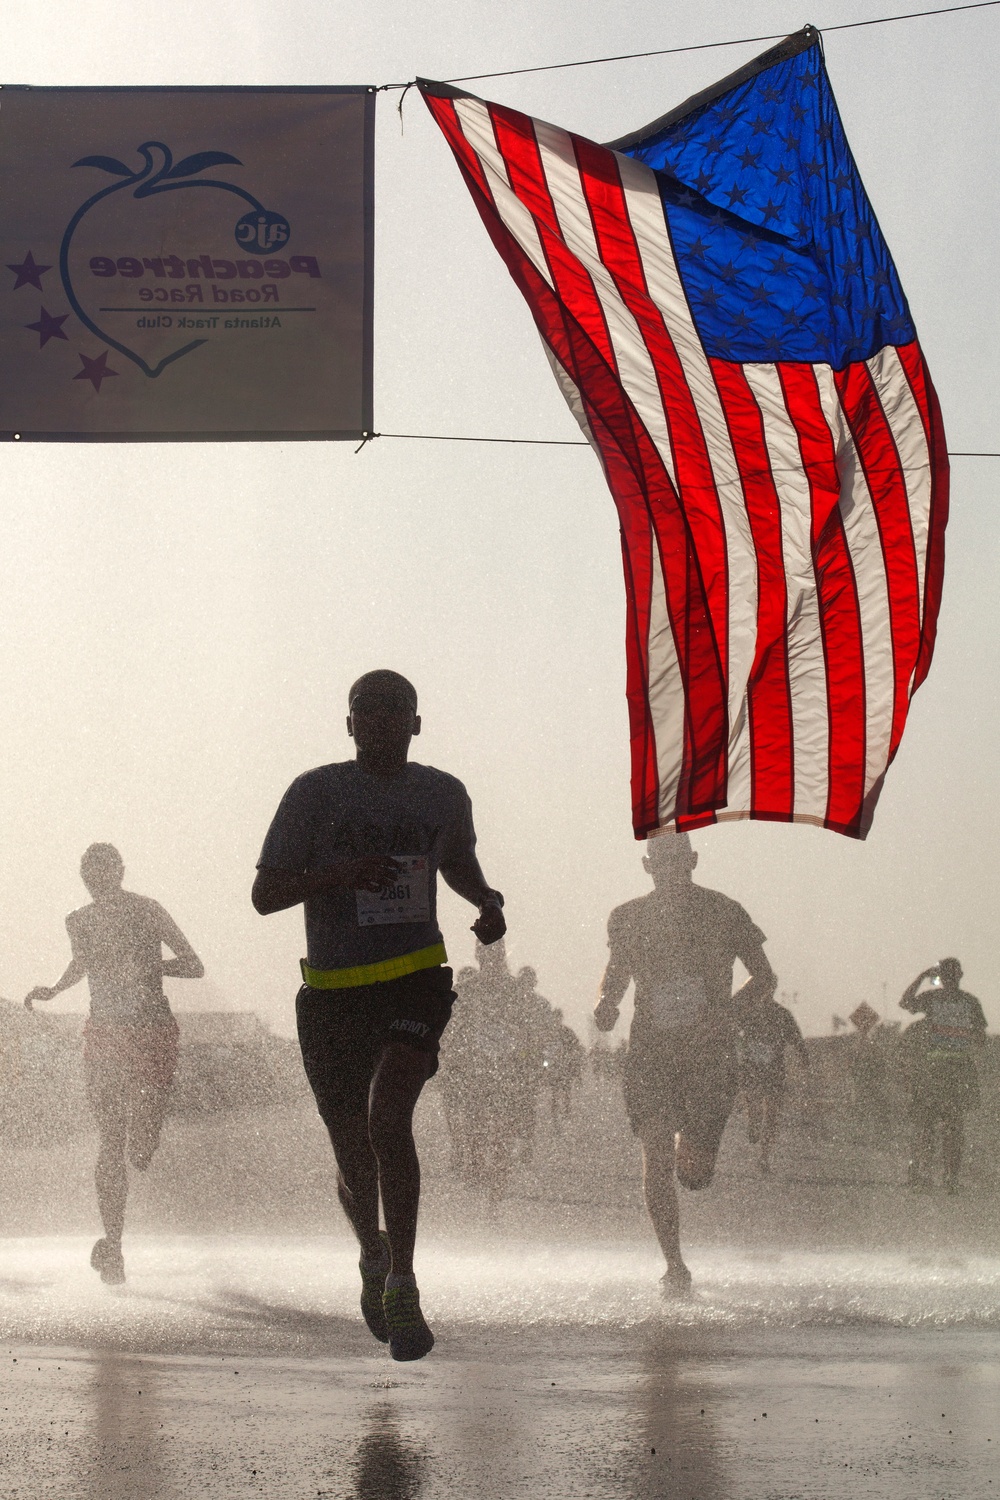 Camp Leatherneck Participates in AJC Peachtree Road Race on the Fourth of July